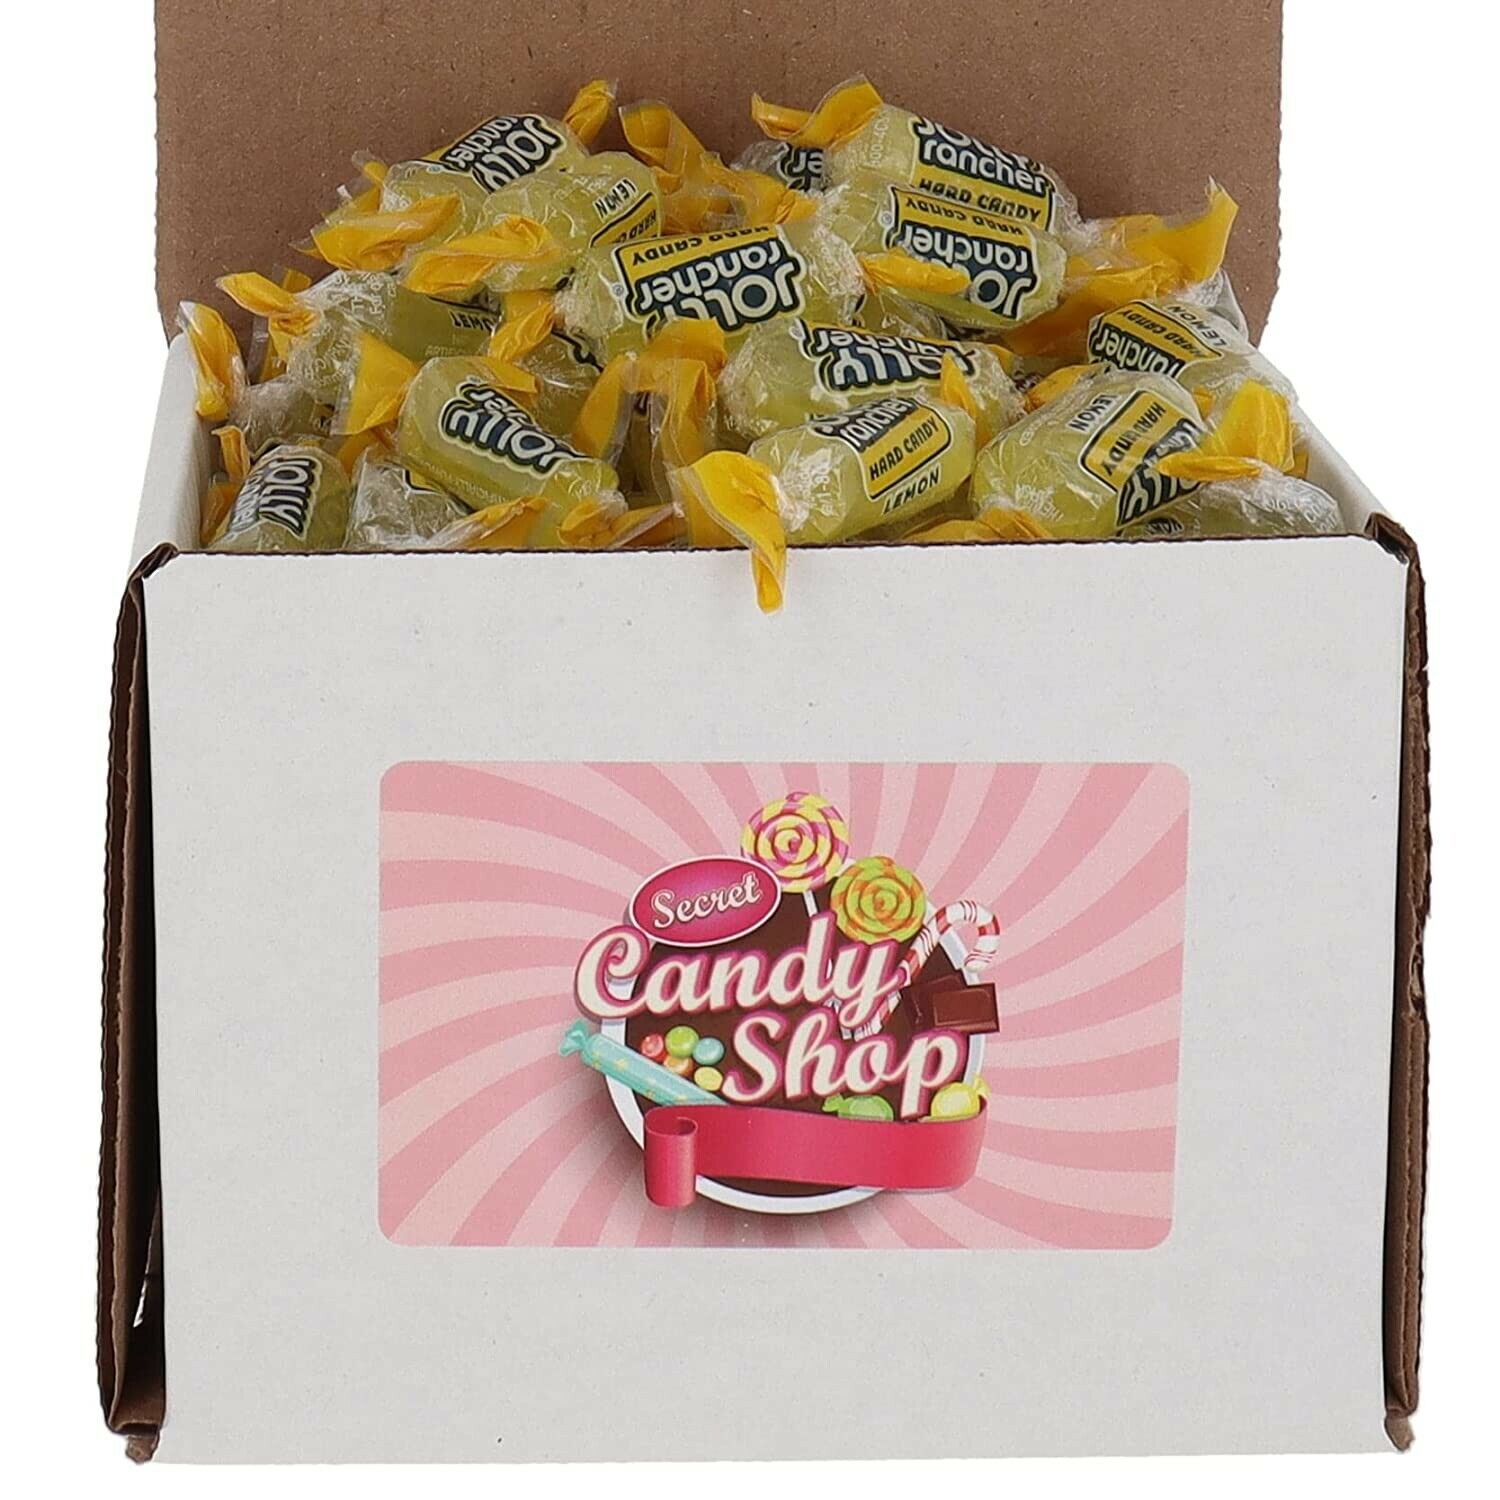 Jolly Rancher Hard Candy Bulk in Box, Individually Wrapped, Lemon Flavor